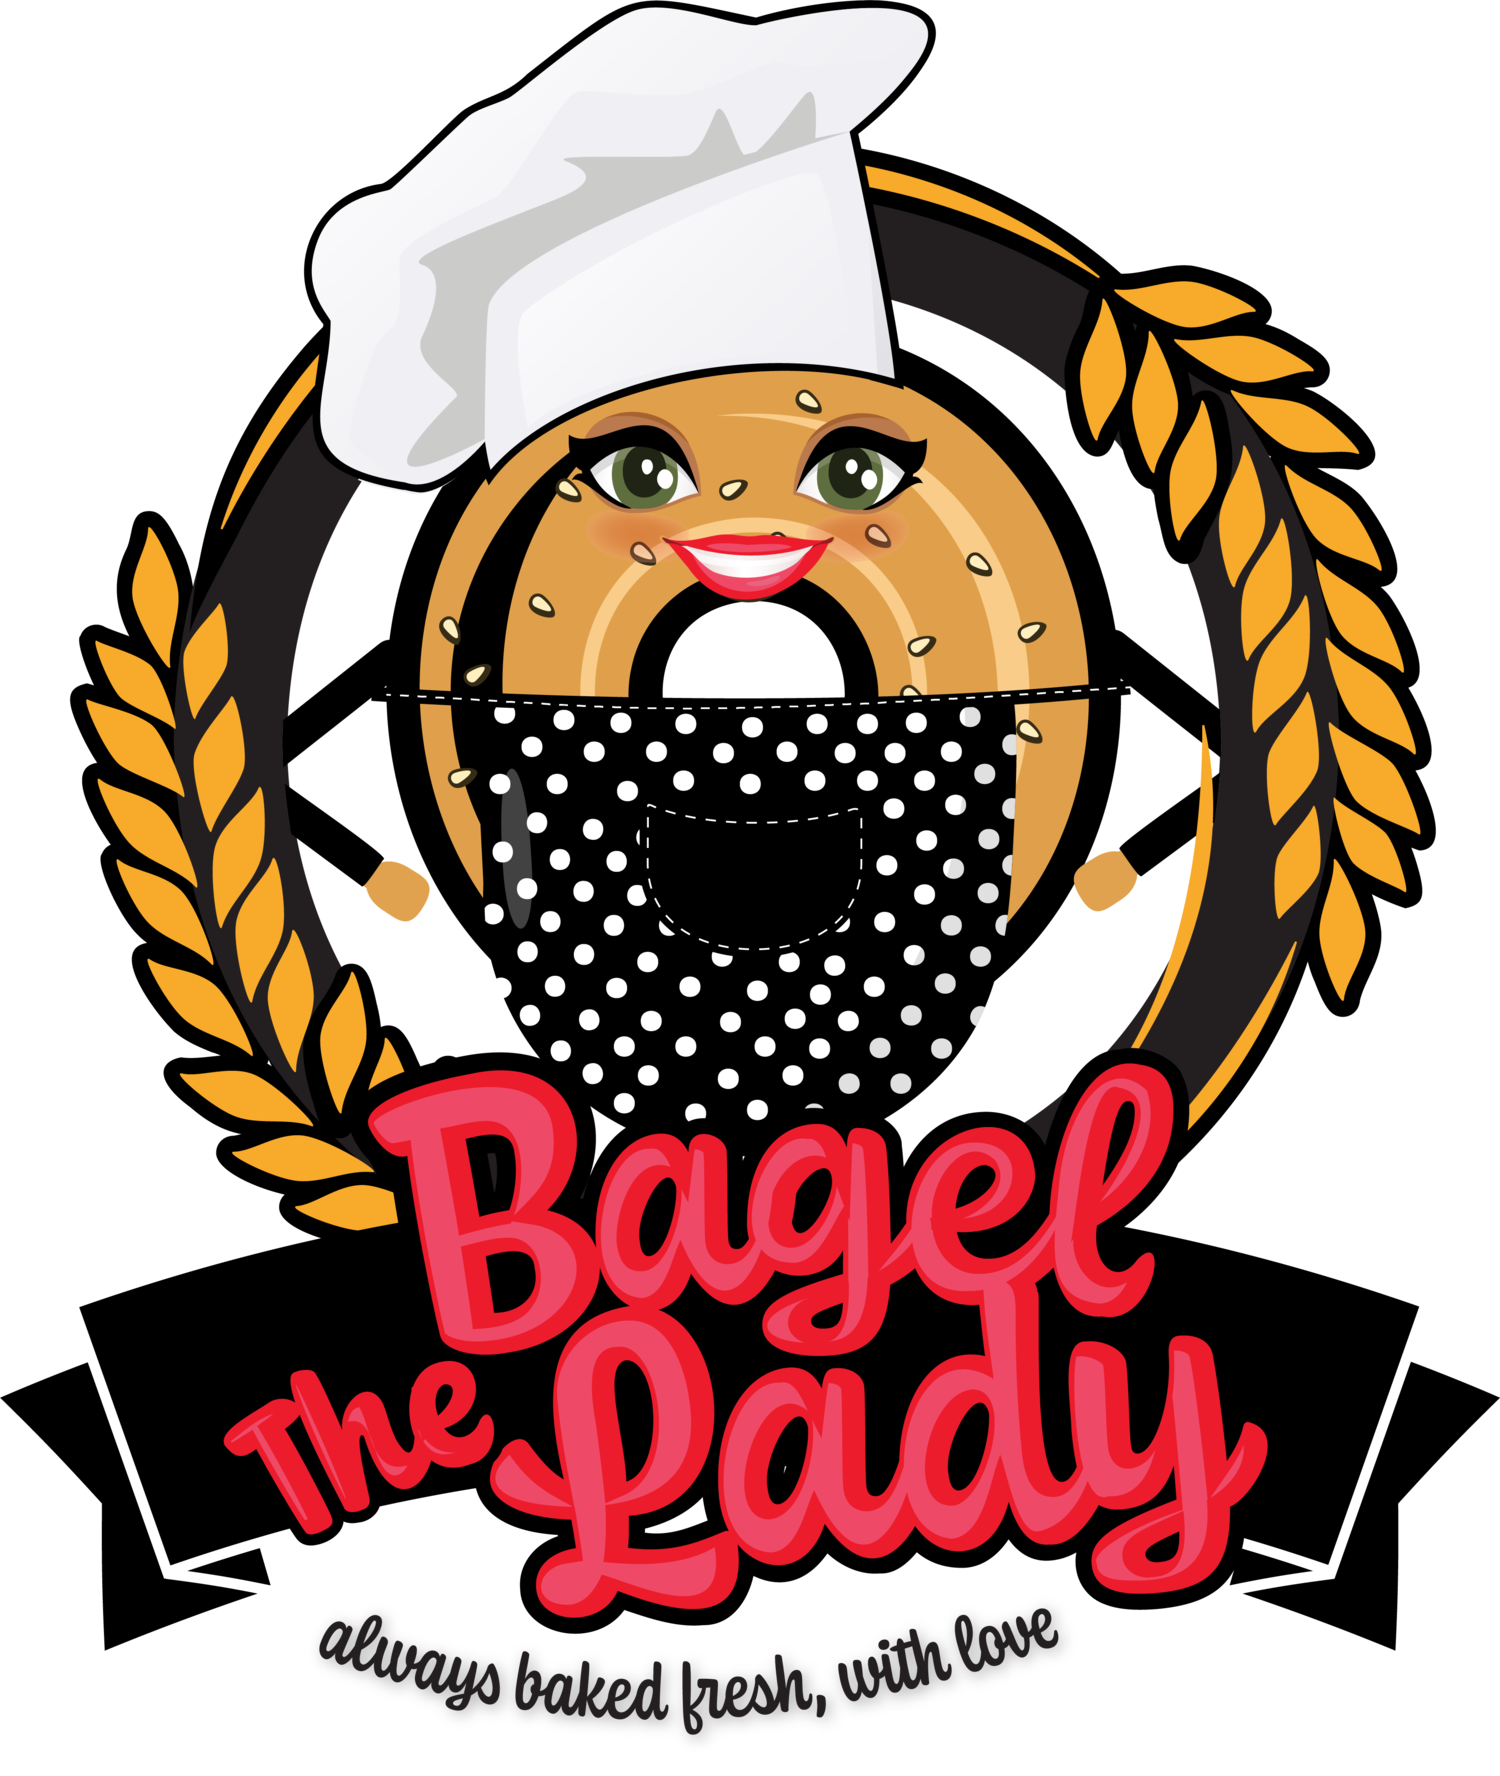 The Bagel Lady